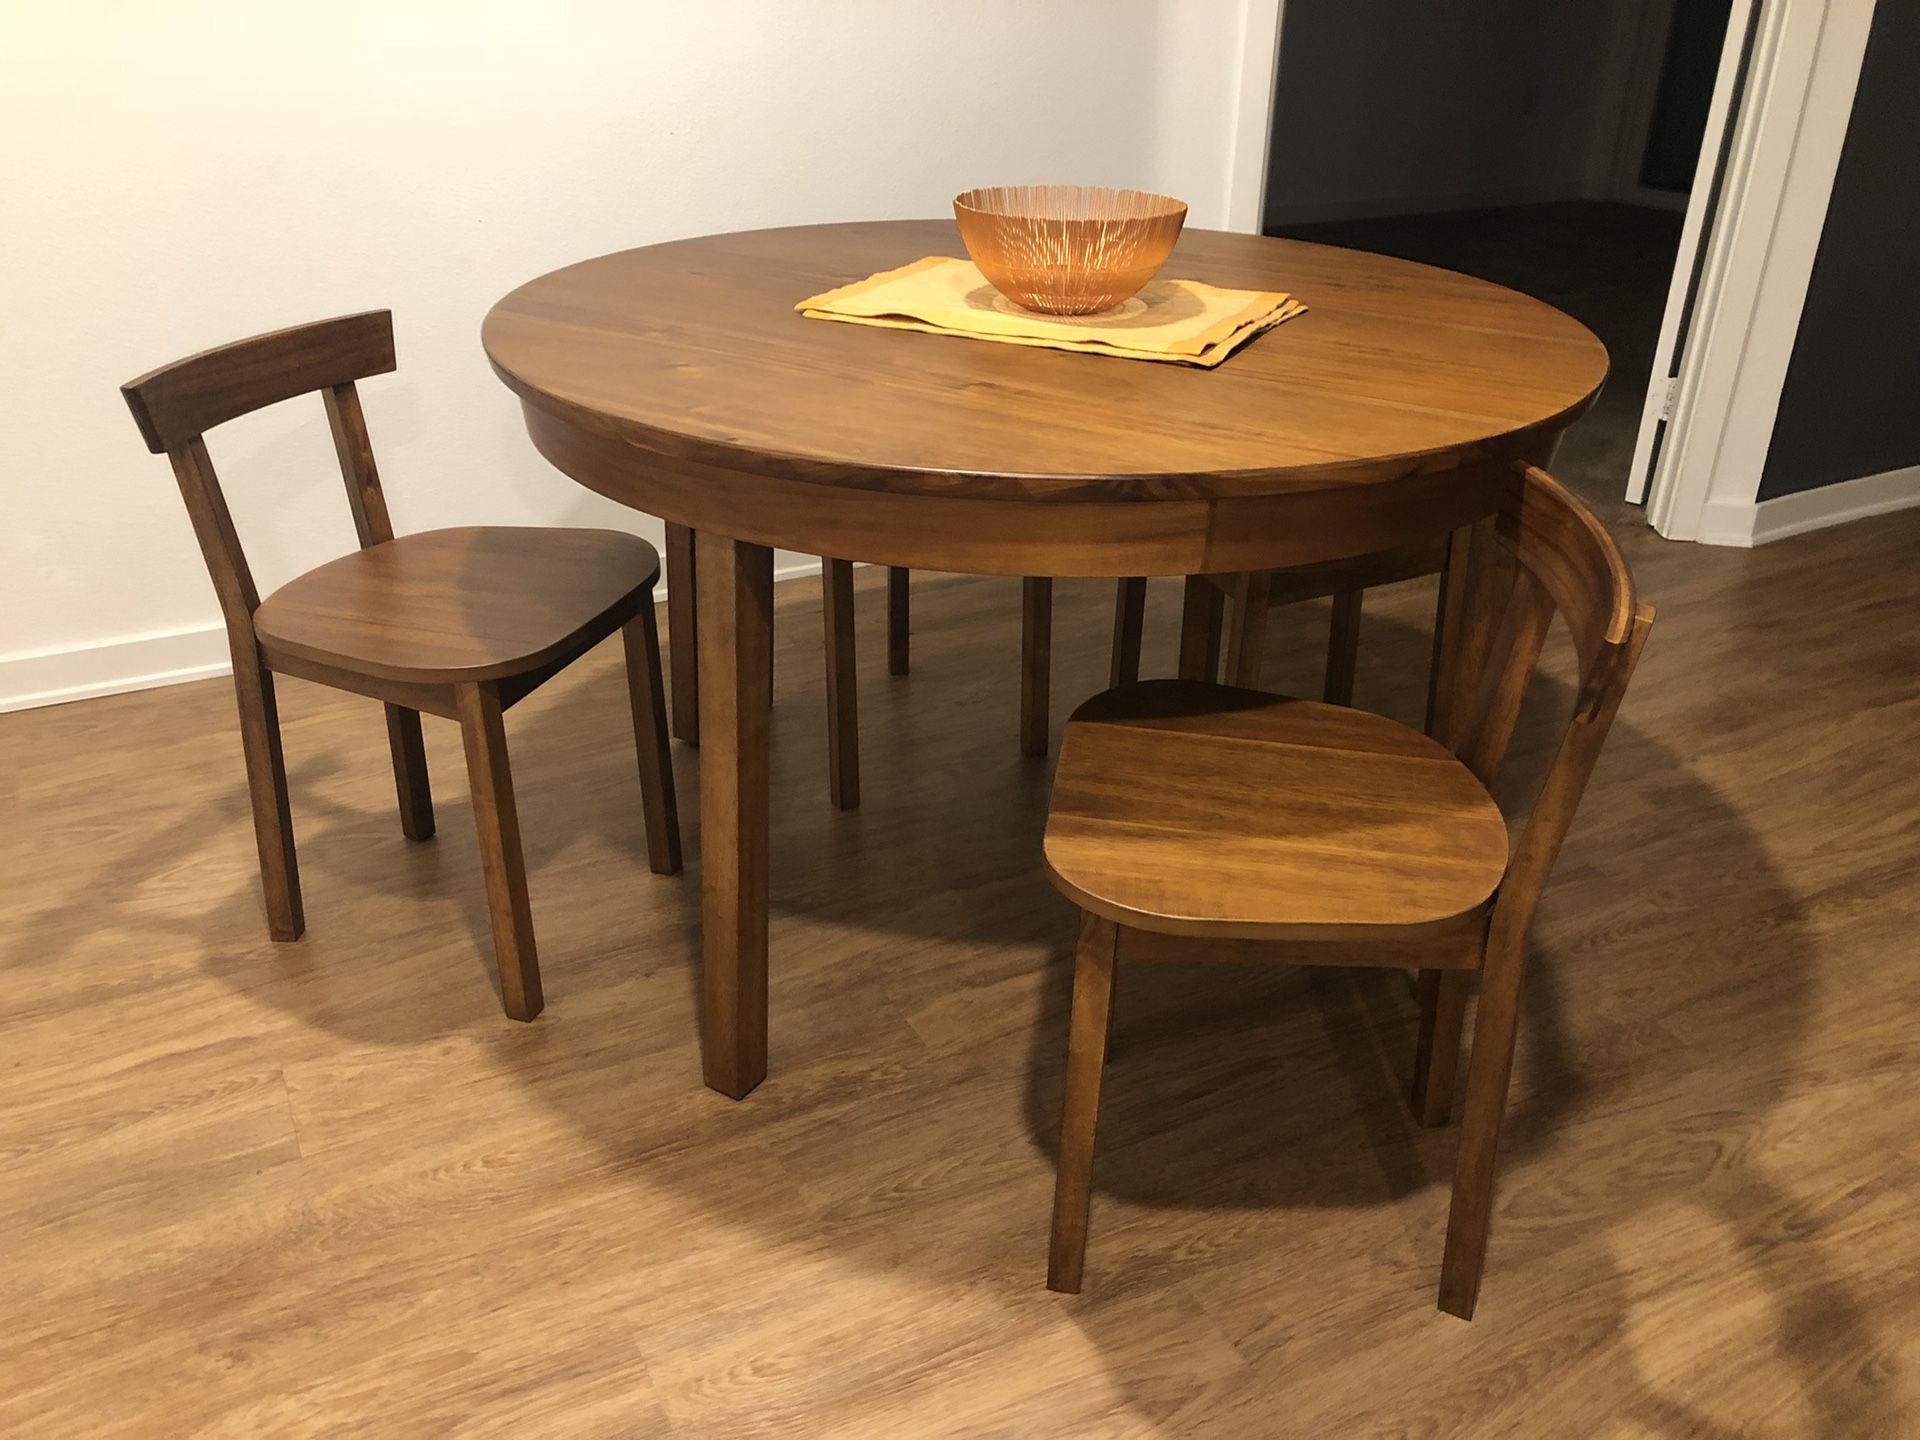 Cb2 5 Piece Claremont Dining Table, Claremont Round Table